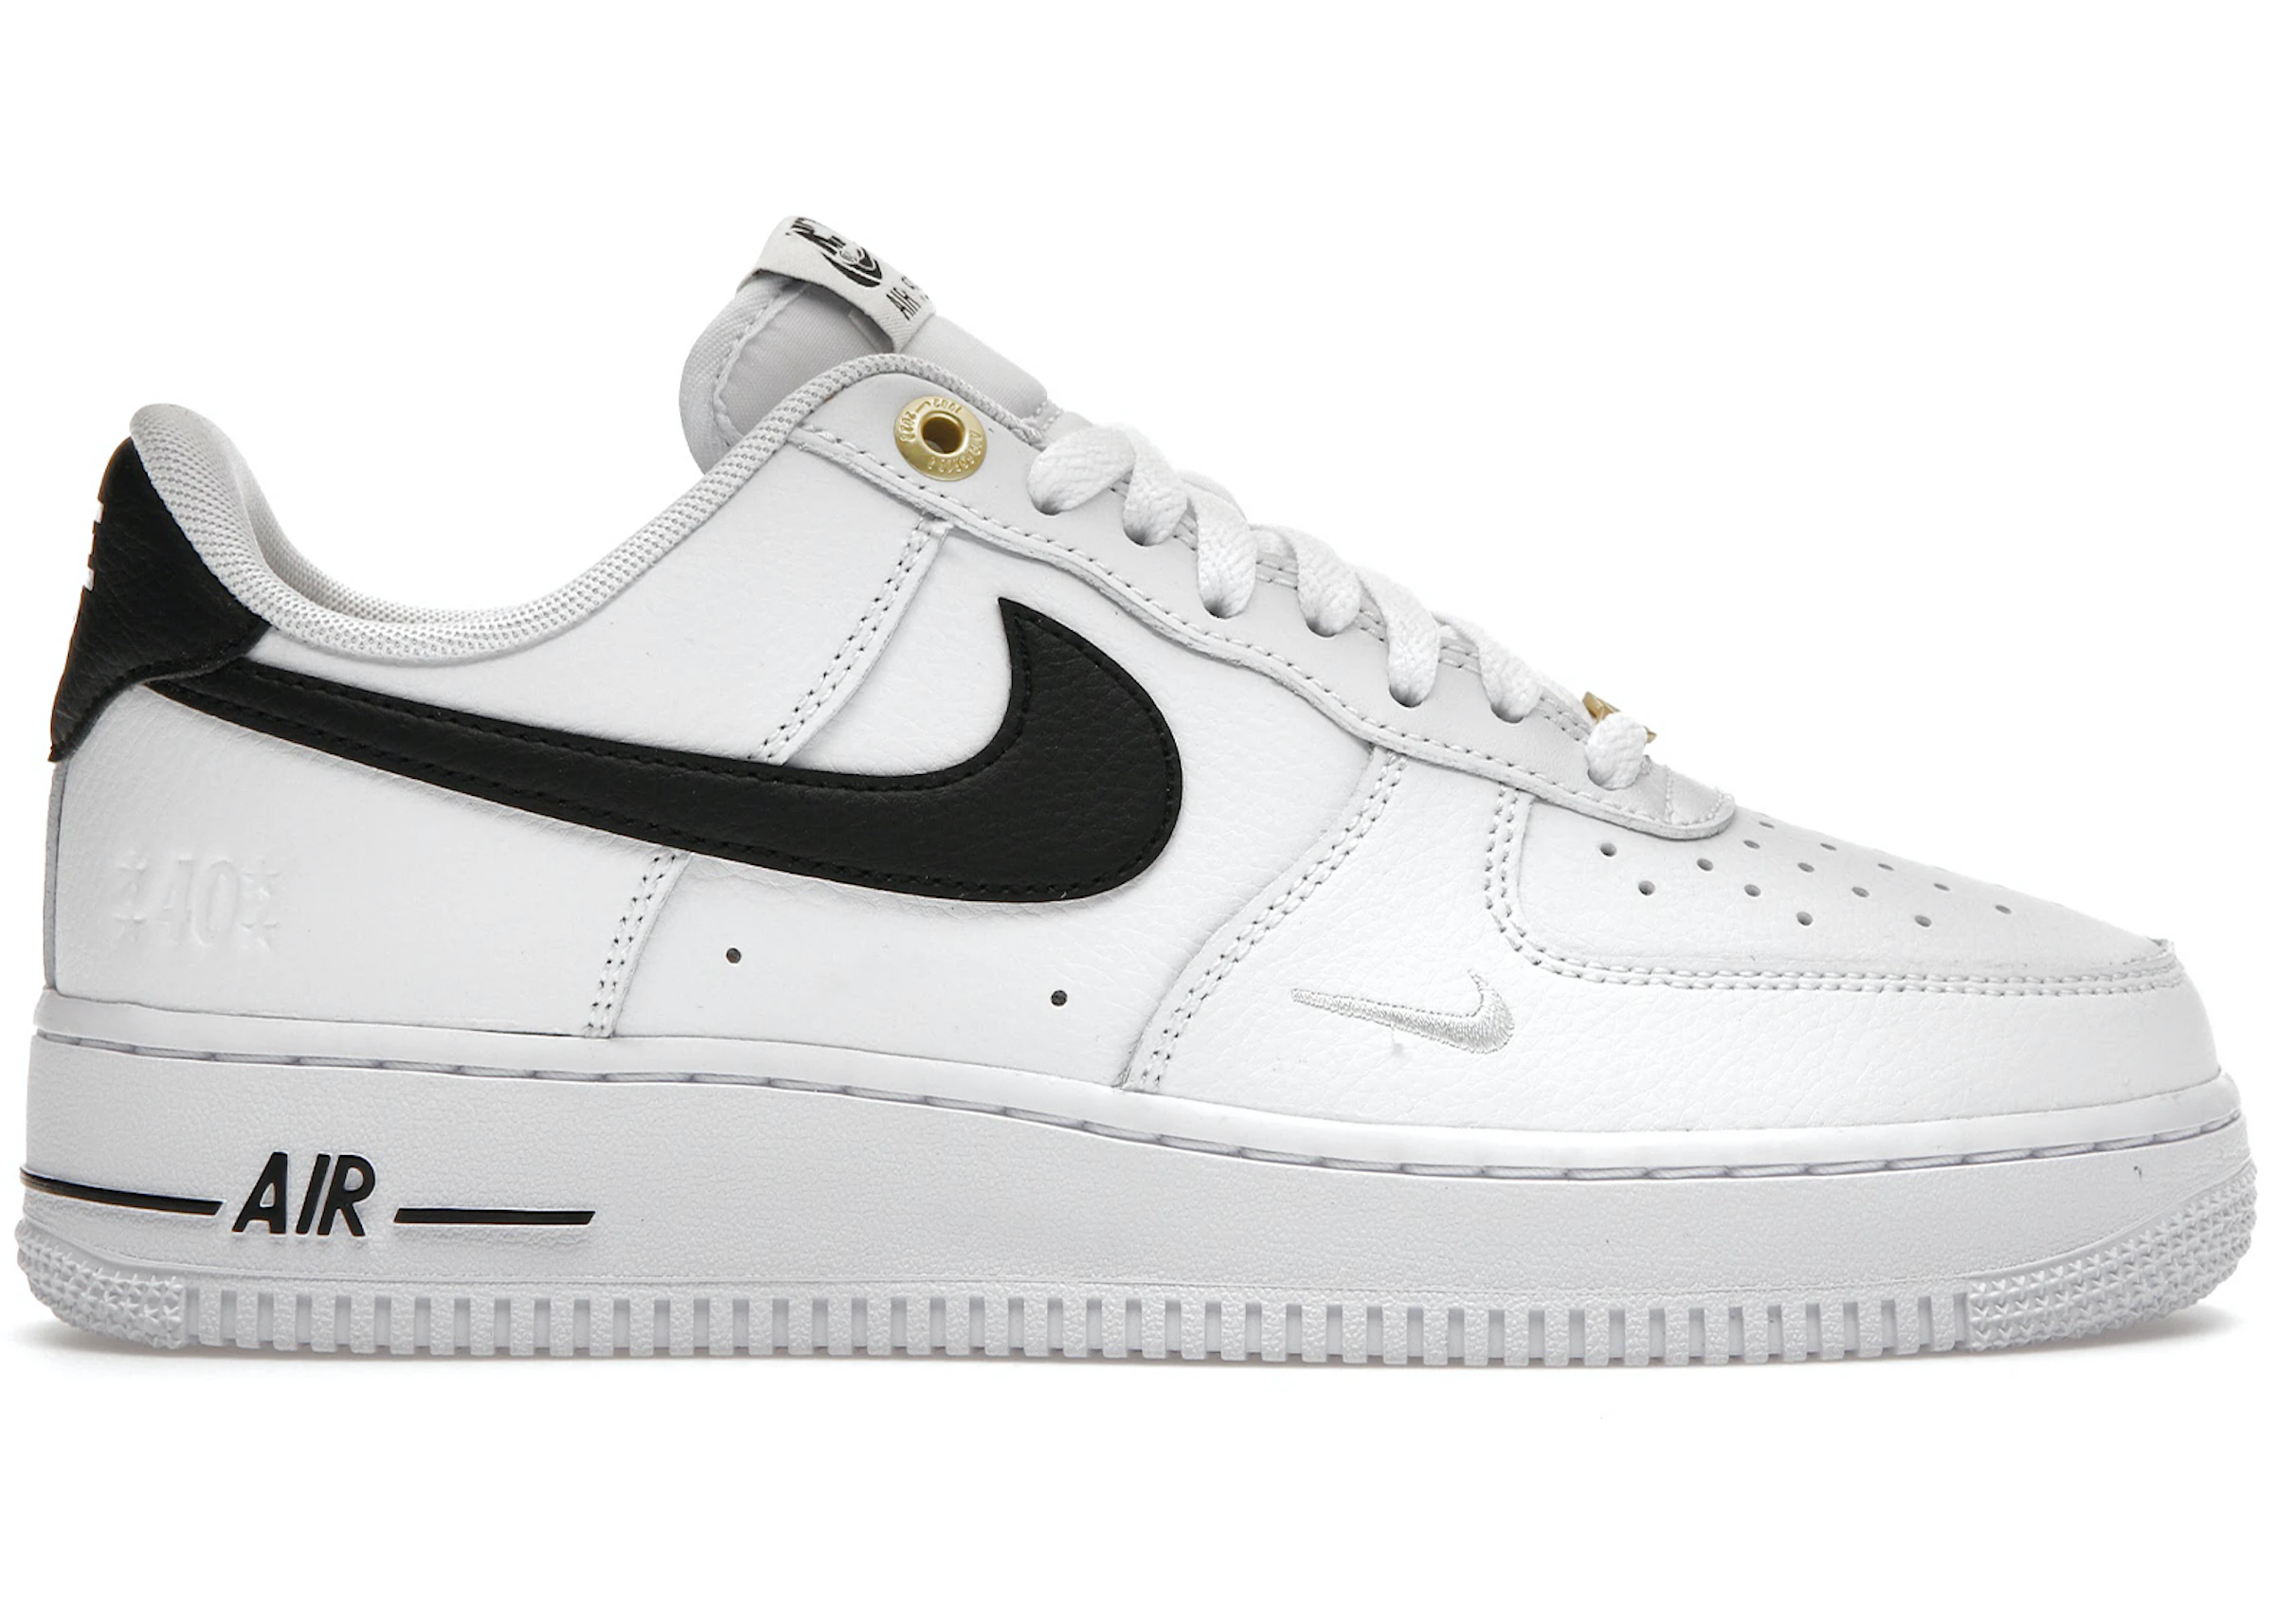 speak Elasticity hand in Nike Air Force 1 Low '07 LV8 40th Anniversary White Black - DQ7658-100 - US